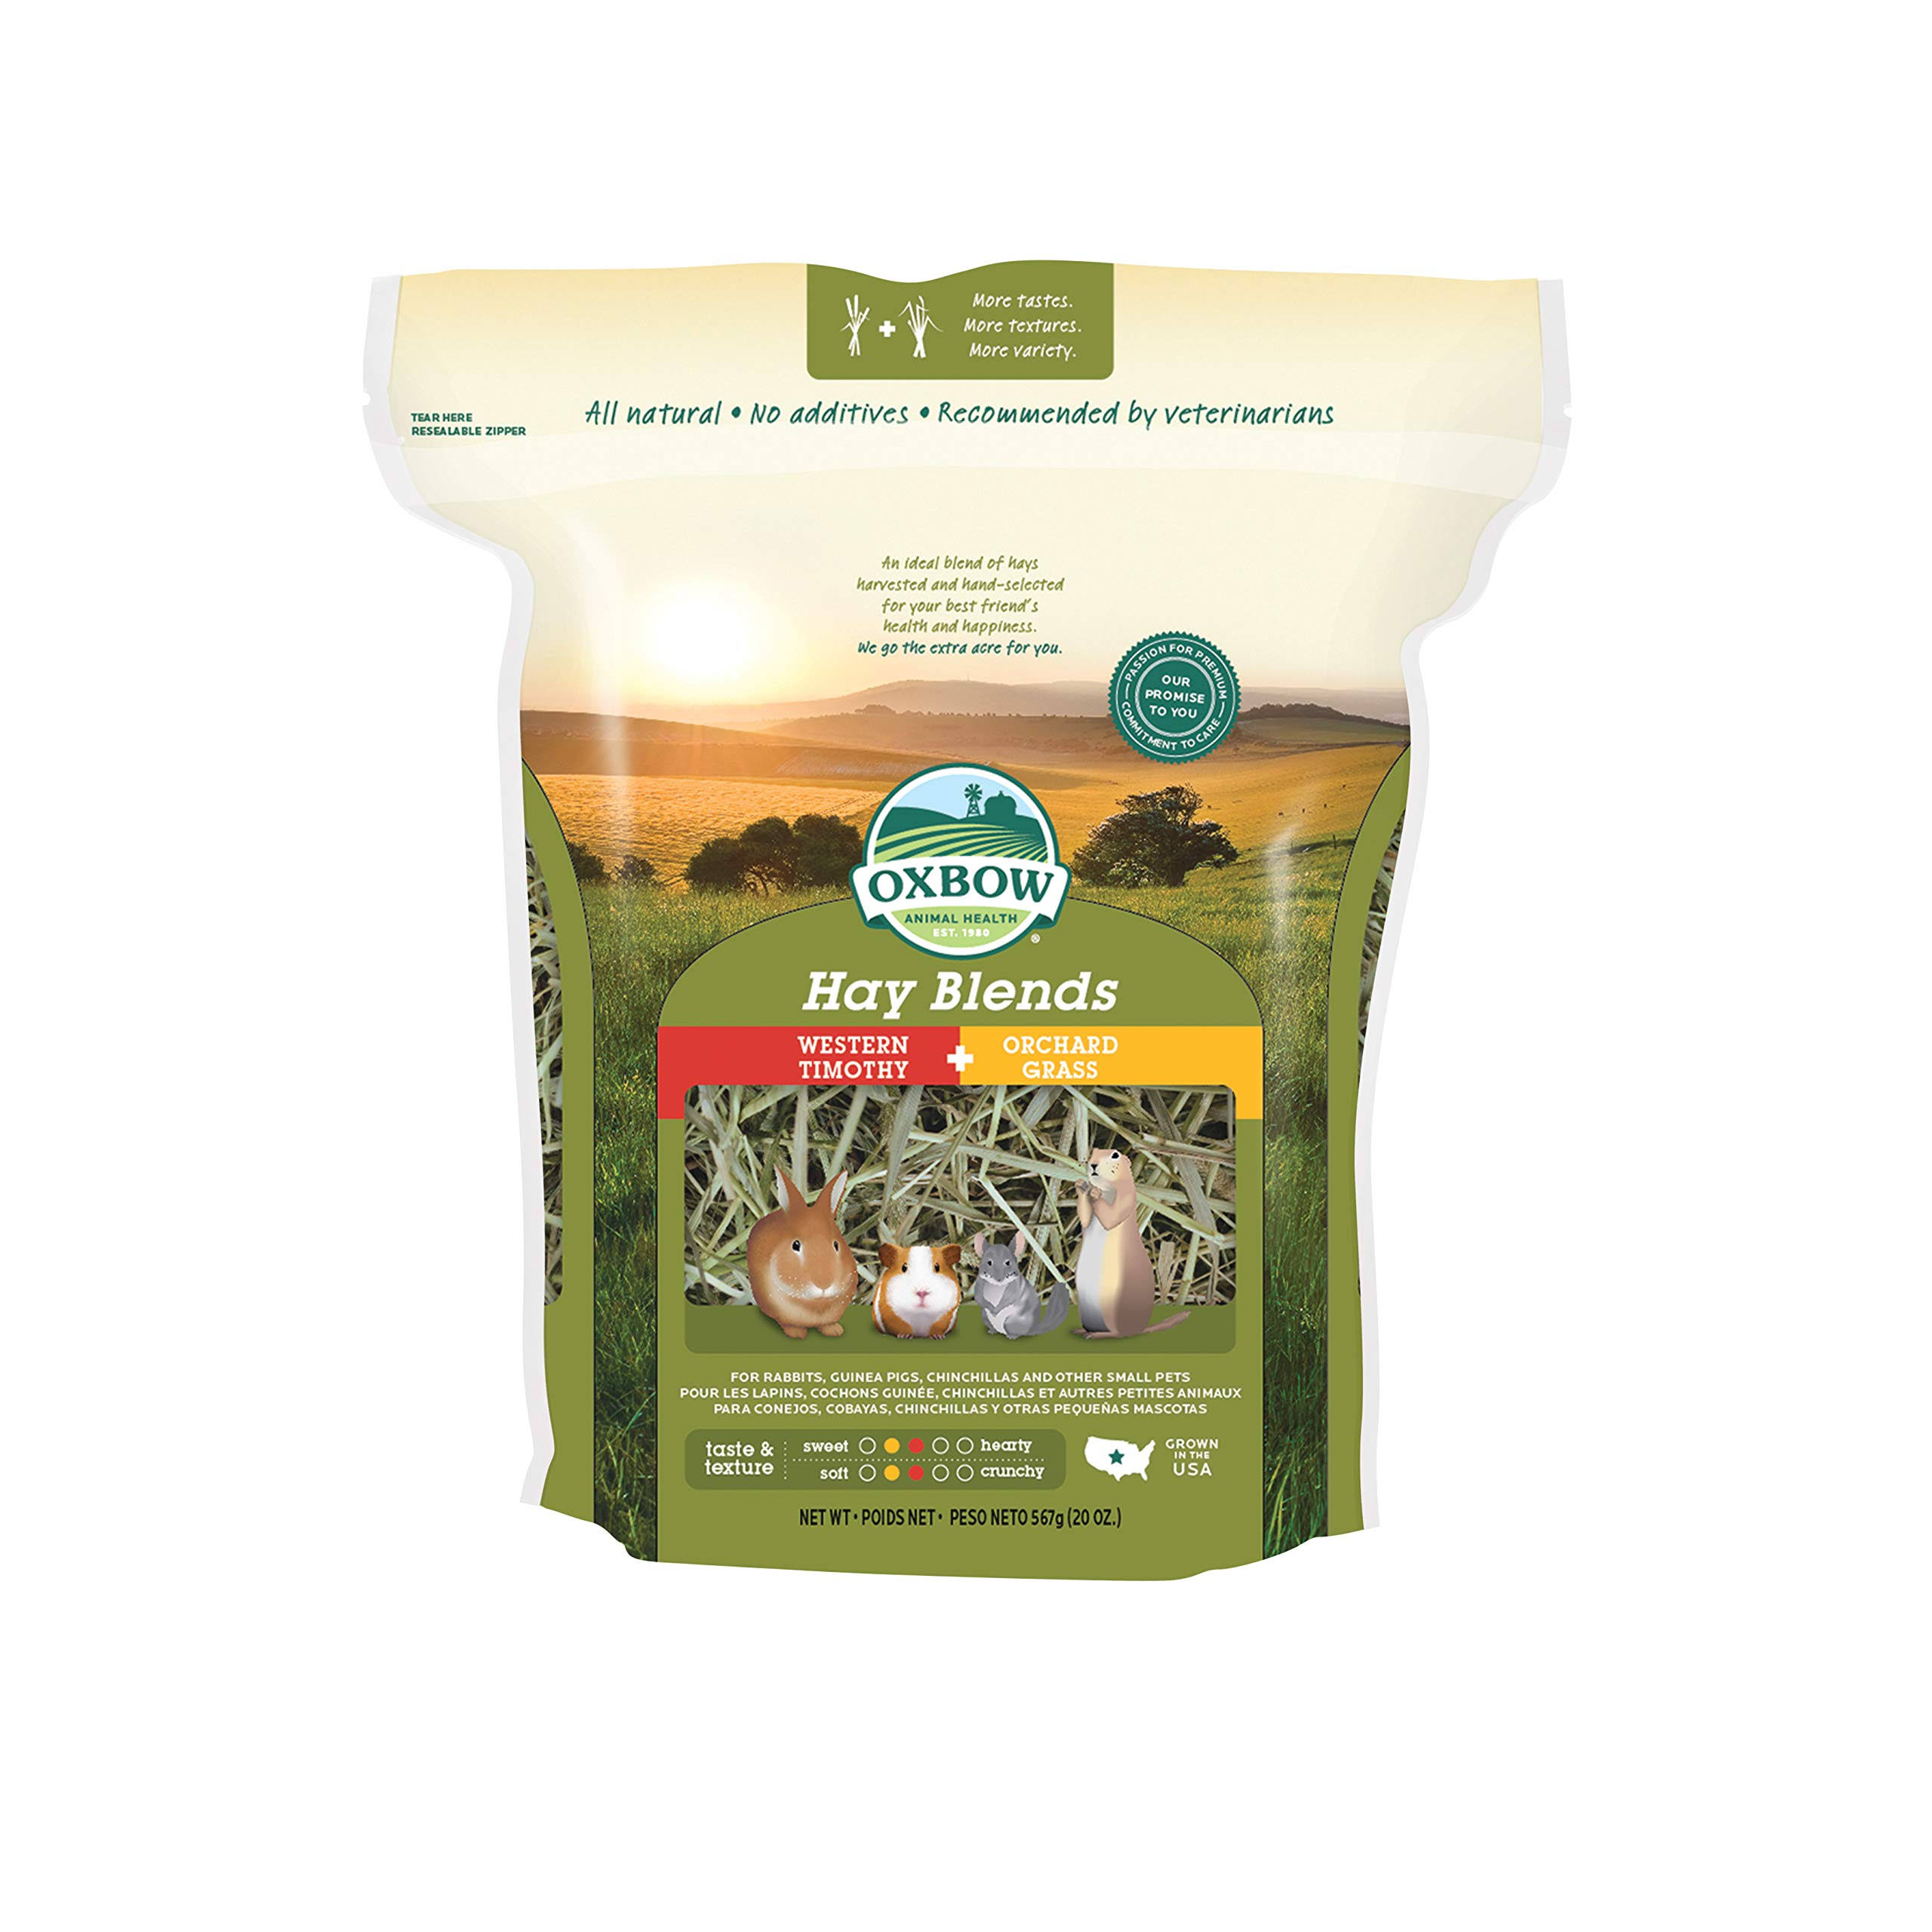 Oxbow Hay Blends Timothy Orchard 20Oz